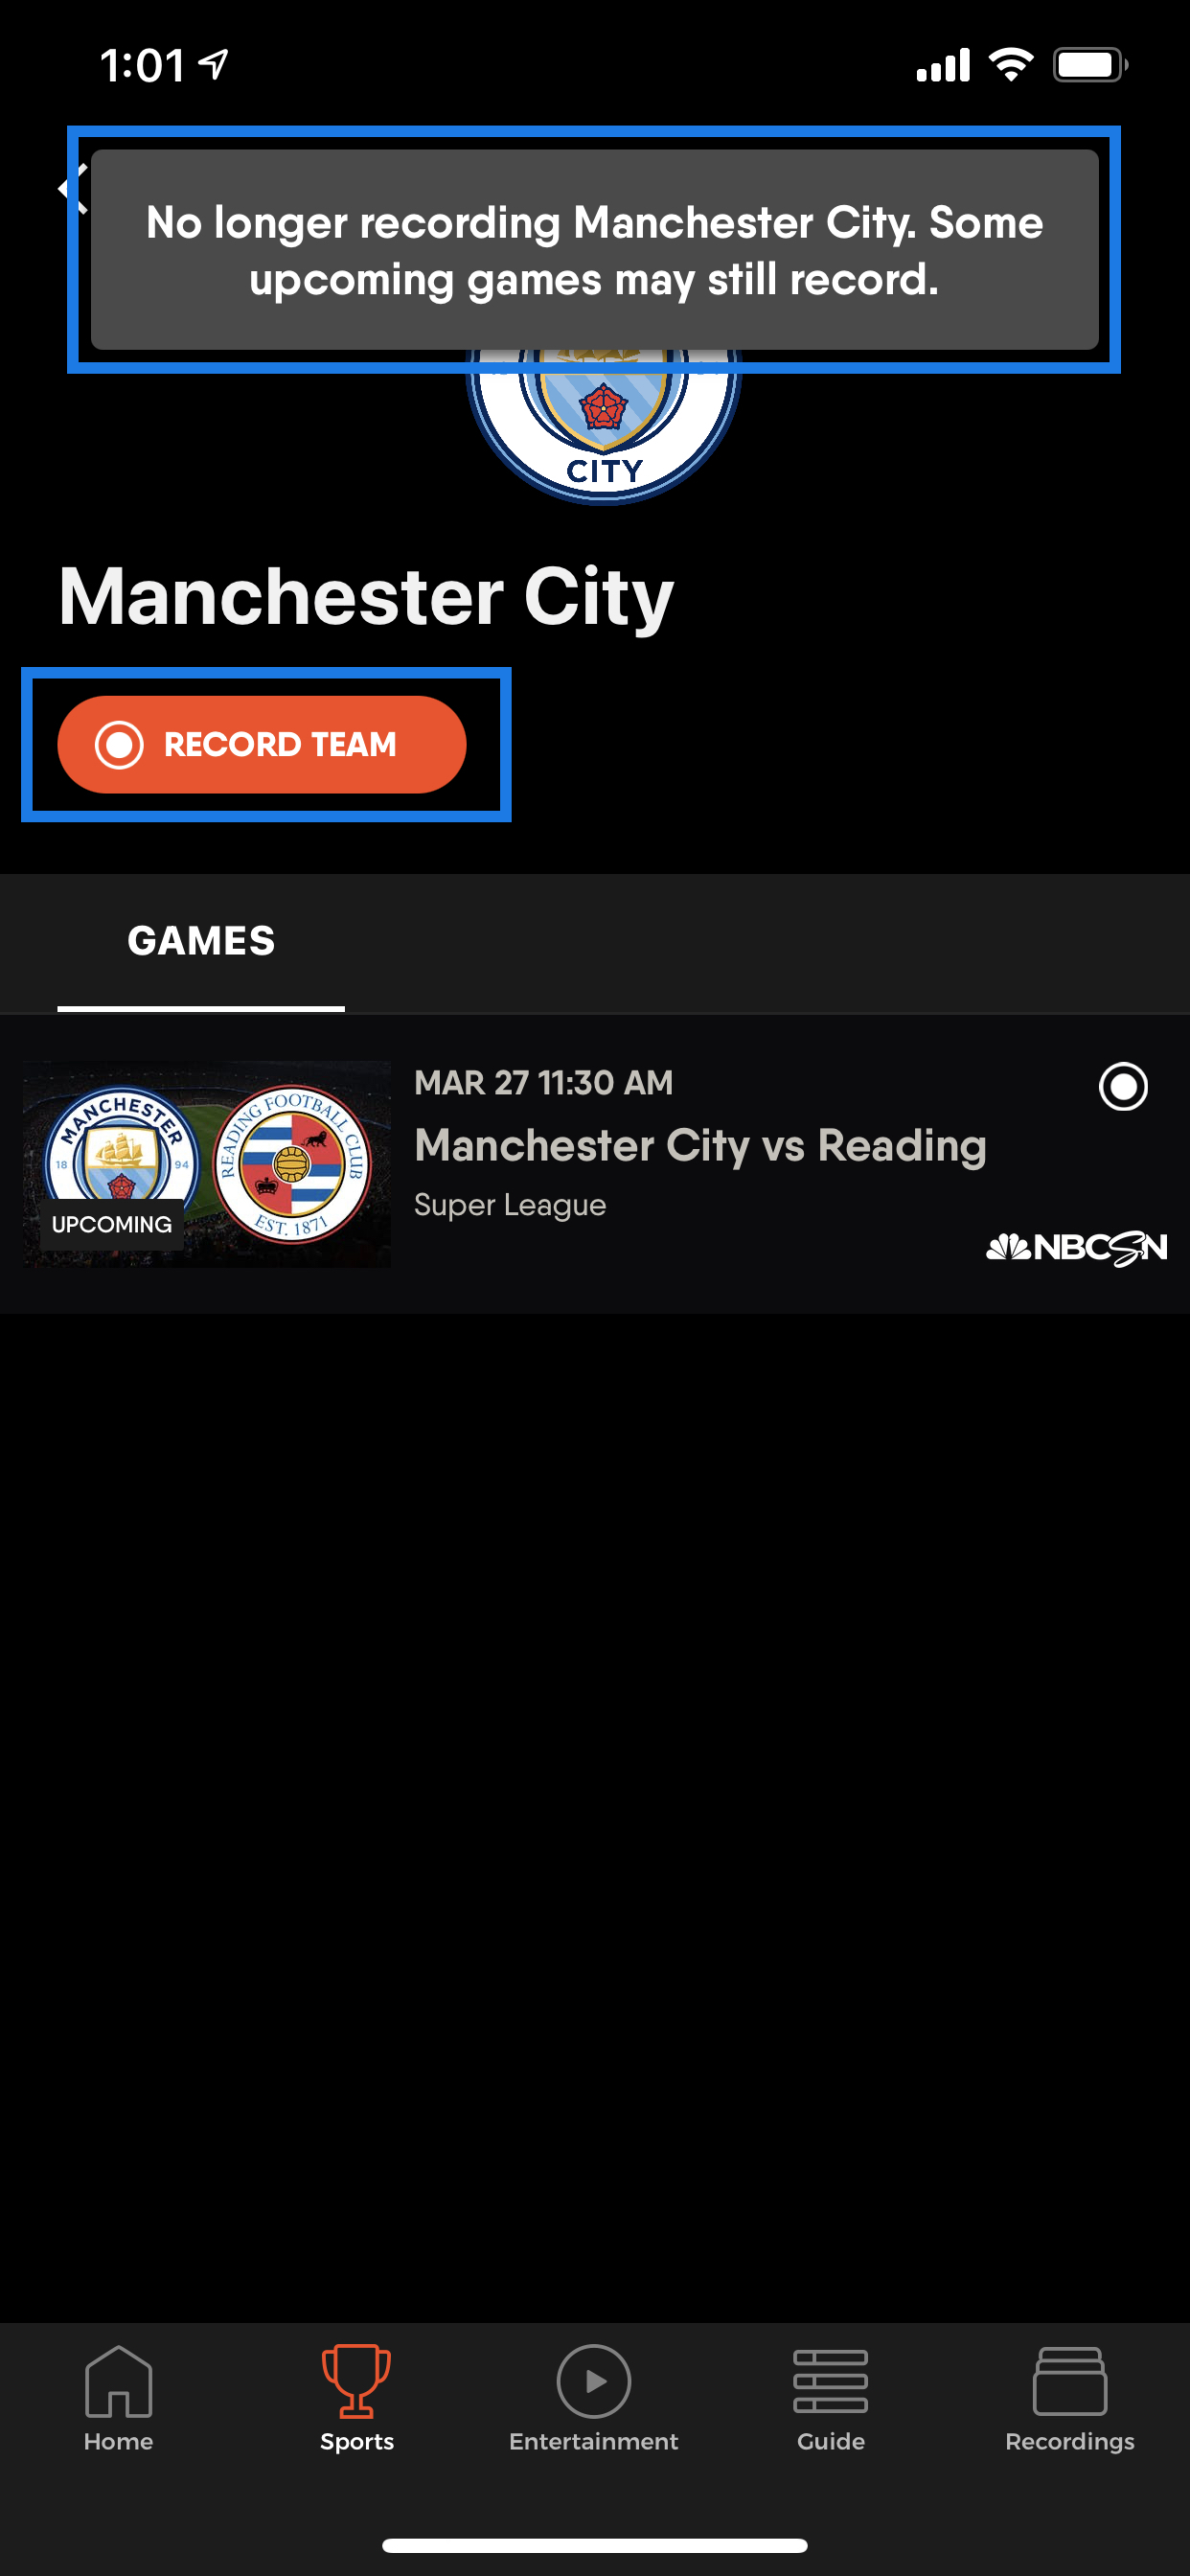 TEAM INFO screen for Manchester City on the FuboTV app for iOS with a confirmation message that matches will no longer be recorded